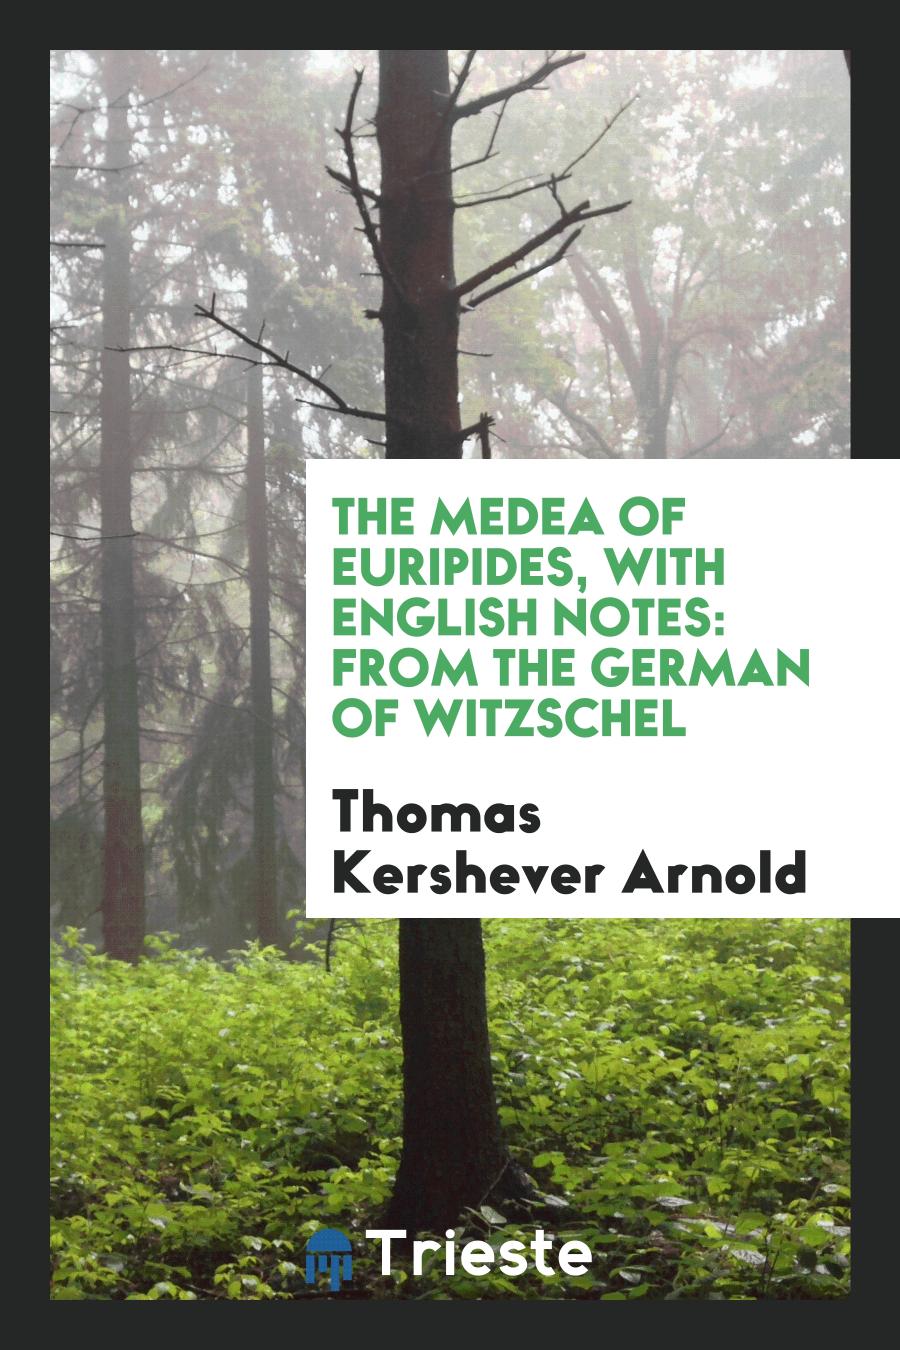 The Medea of Euripides, with English Notes: From the German of Witzschel